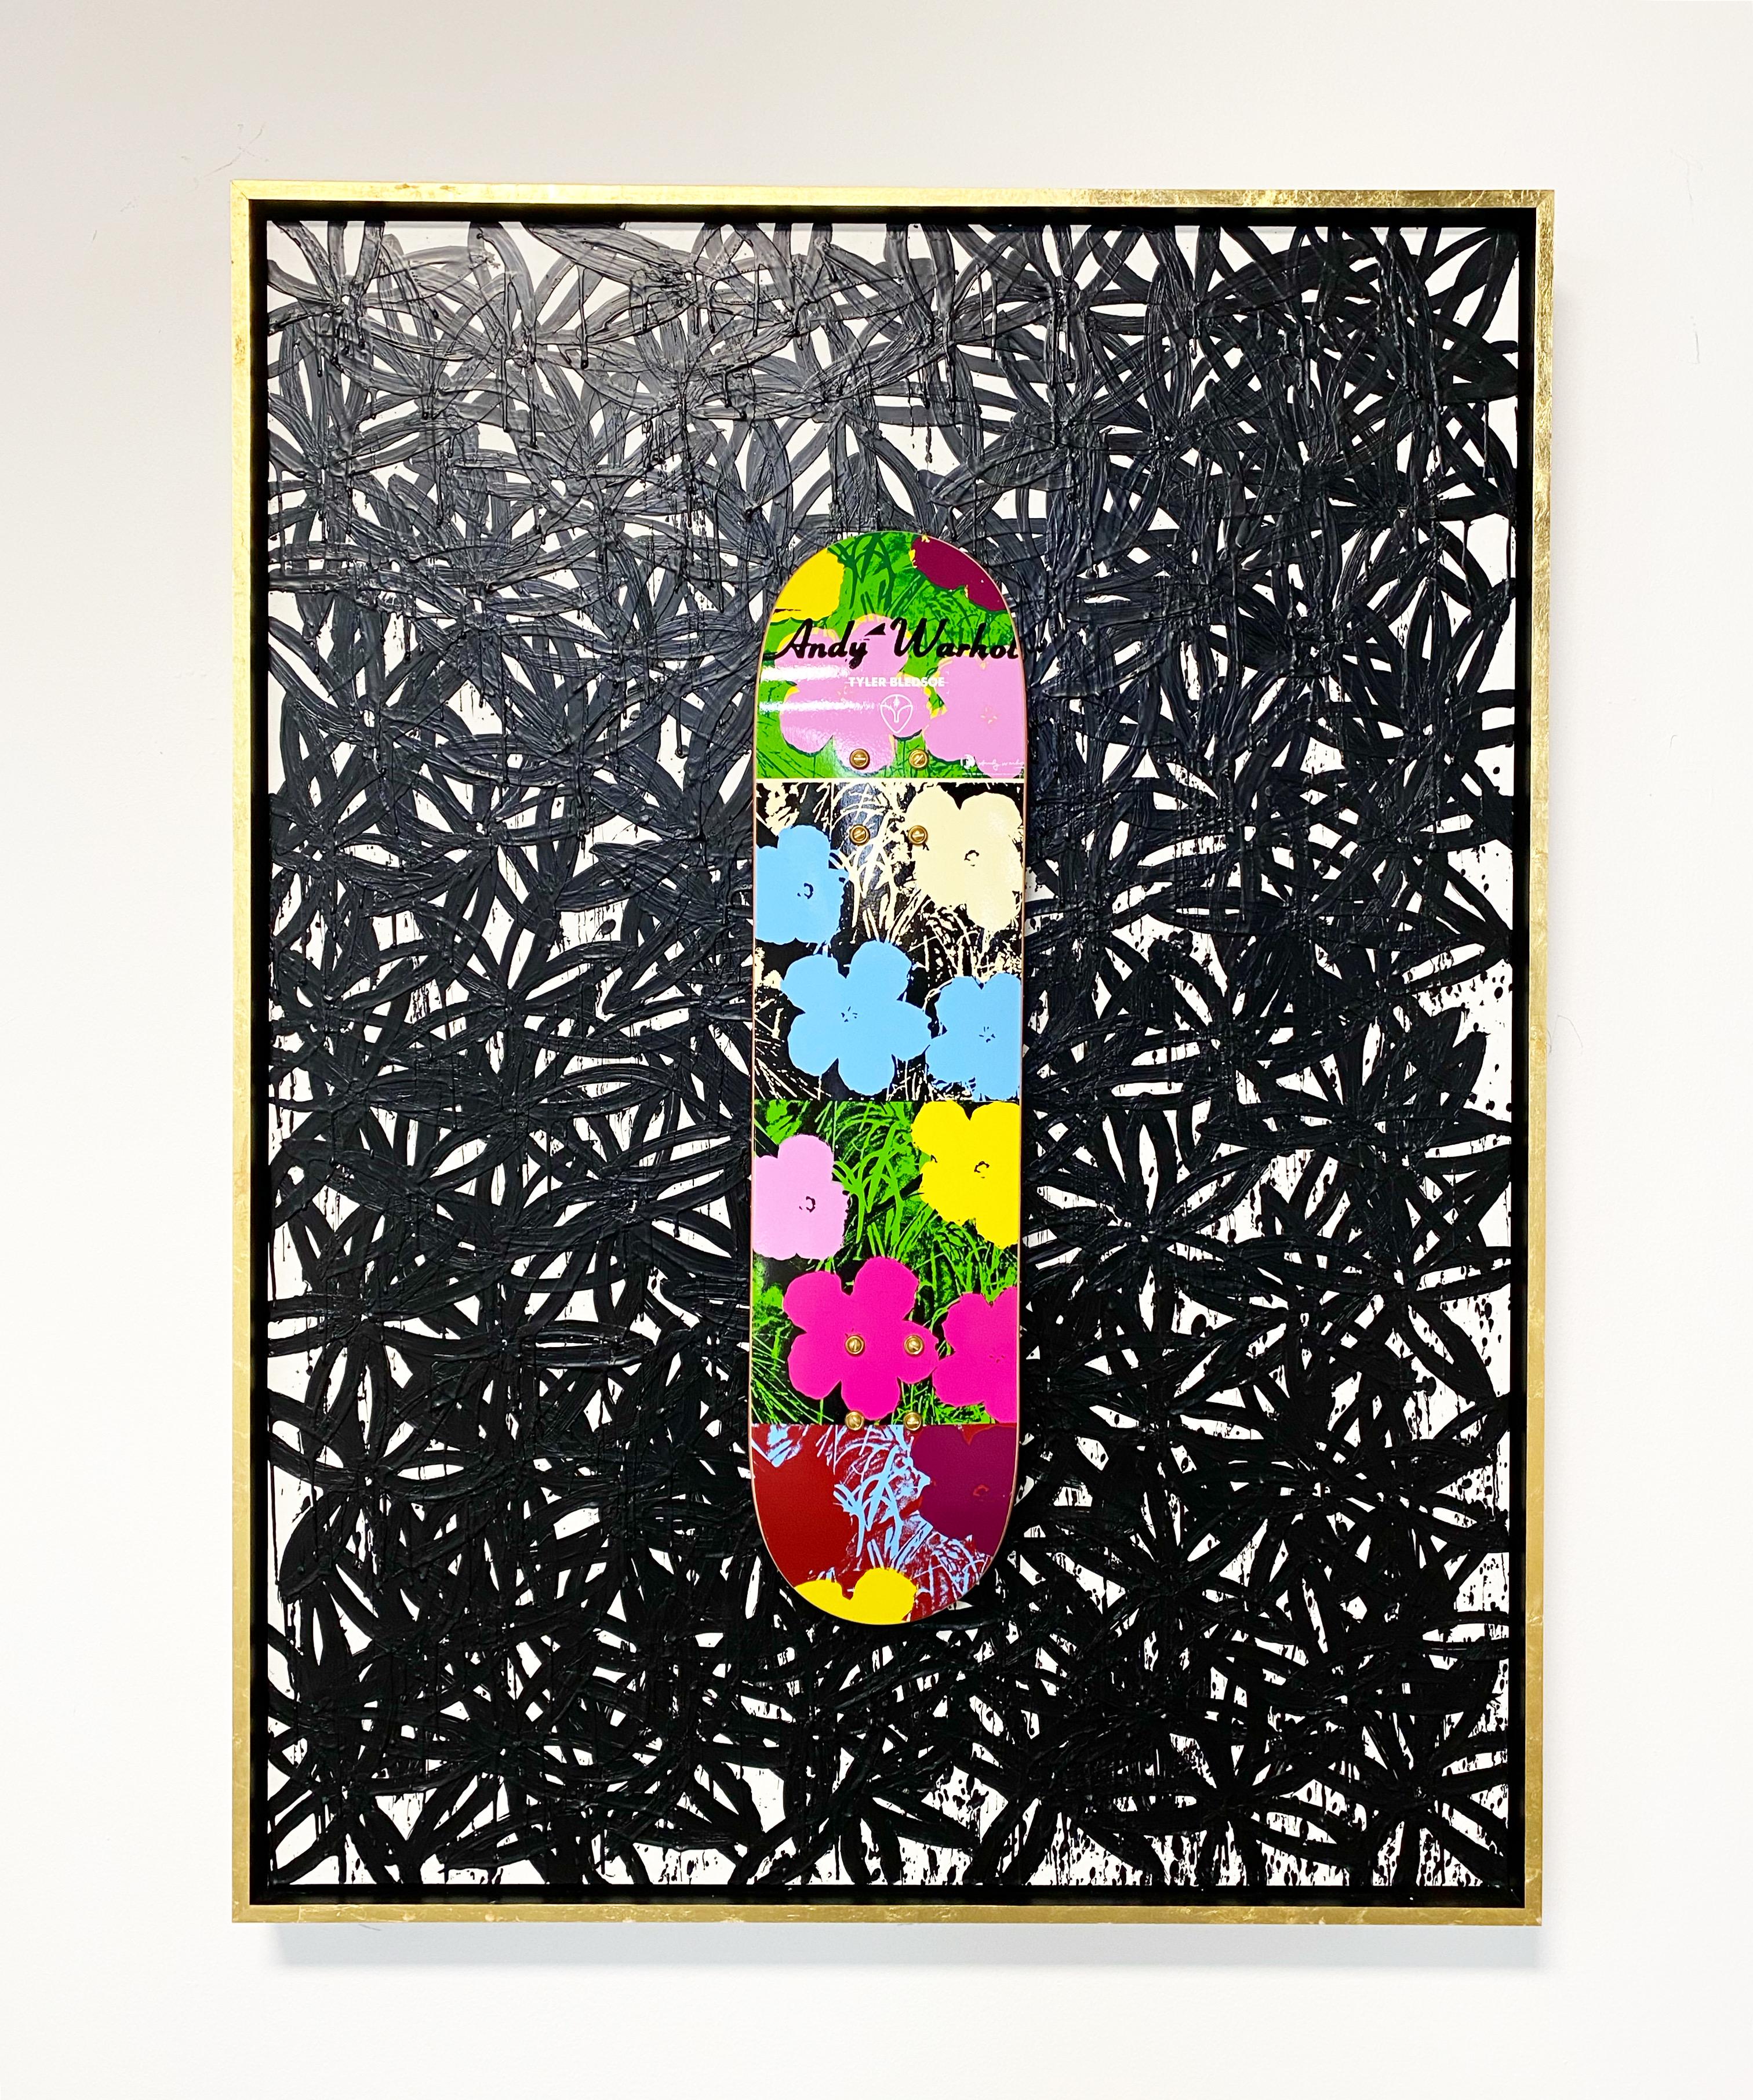 The Deck series. Screen-printed maple skate deck float-mounted on encaustic painted board.This rare, out of print skate deck was designed in 2010 by Alien Workshop and the Andy Warhol Foundation.

Framed in maple float frame with 24 K gold leaf